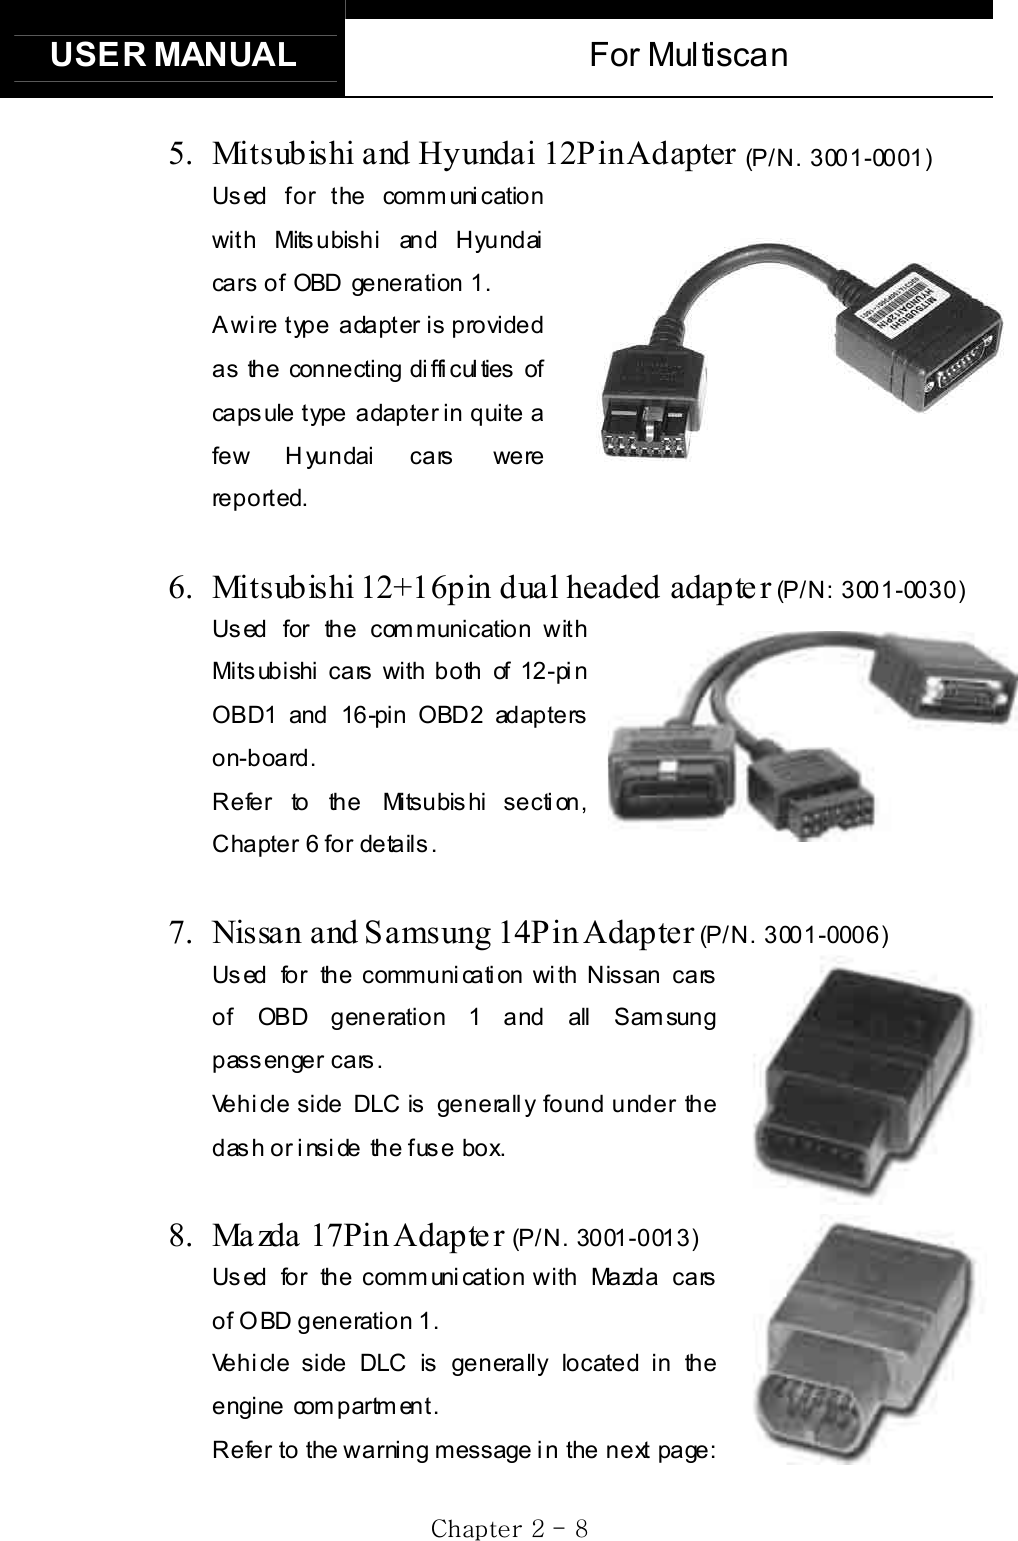 USER MANUAL  For Multiscan GjGYGTG _G5.  Mitsubishi and Hyundai 12Pin Adapter (P/N. 3001-0001)Us ed for t he comm uni cation with Mitsubishi and Hyundai cars  of OBD generation 1.    A wire type adapter is provided as the connecting difficulties of caps ule type adapter in quite a few H yundai cars   were reported. 6.  Mitsubishi 12+16pin dual headed  adapte r (P/N: 3001-0030)Us ed for the com munication with Mitsubishi cars with both of 12-pin OBD1 and 16-pin OBD2 adapters on-board. R e fe r to  th e  Mi ts u bis hi  s e c ti on , Chapter 6 for details. 7.  Nissan and Samsung 14Pin Adapter (P/N. 3001-0006)Used for the communication with Nissan cars of OBD generation 1 and all Samsung passenger cars.     Vehicle side DLC is generally found under the dash or inside  the fuse  box. 8. Ma zda 17Pin Adapte r (P / N . 30 01 - 0 01 3 )Us ed  fo r  th e c om m uni cat io n w i th  Ma zd a  c a rs  of OBD generation 1. Vehicle side DLC is generally located in the engine com partm ent. Refer  to  the warning message i n the  next page: 